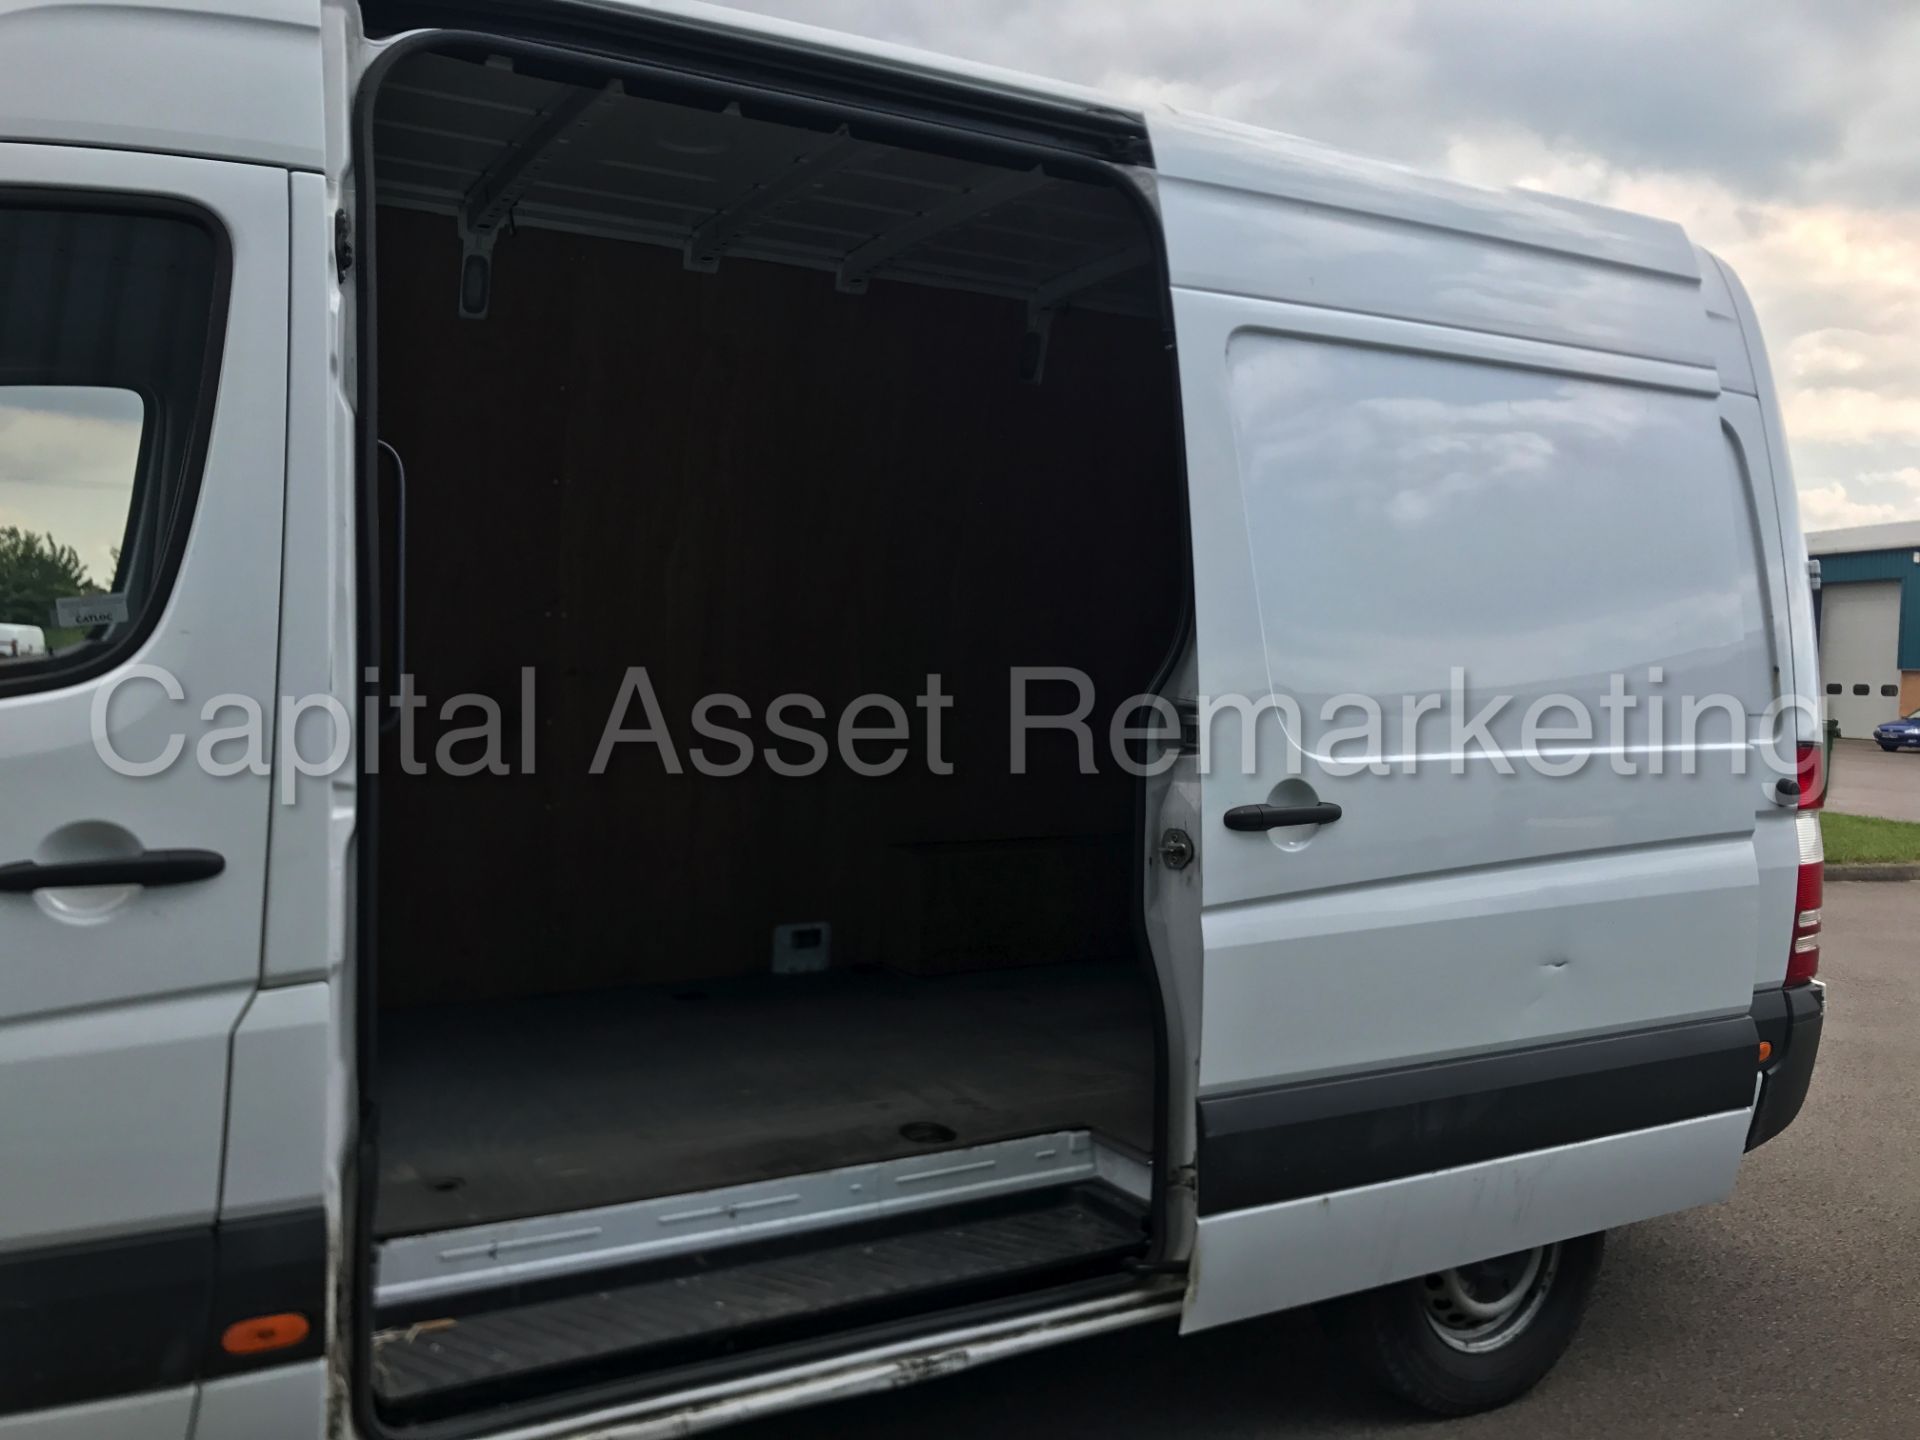 MERCEDES-BENZ SPRINTER 313 CDI 'MWB HI-ROOF' (2014) '130 BHP - 6 SPEED' (1 COMPANY OWNER FROM NEW) - Image 14 of 22